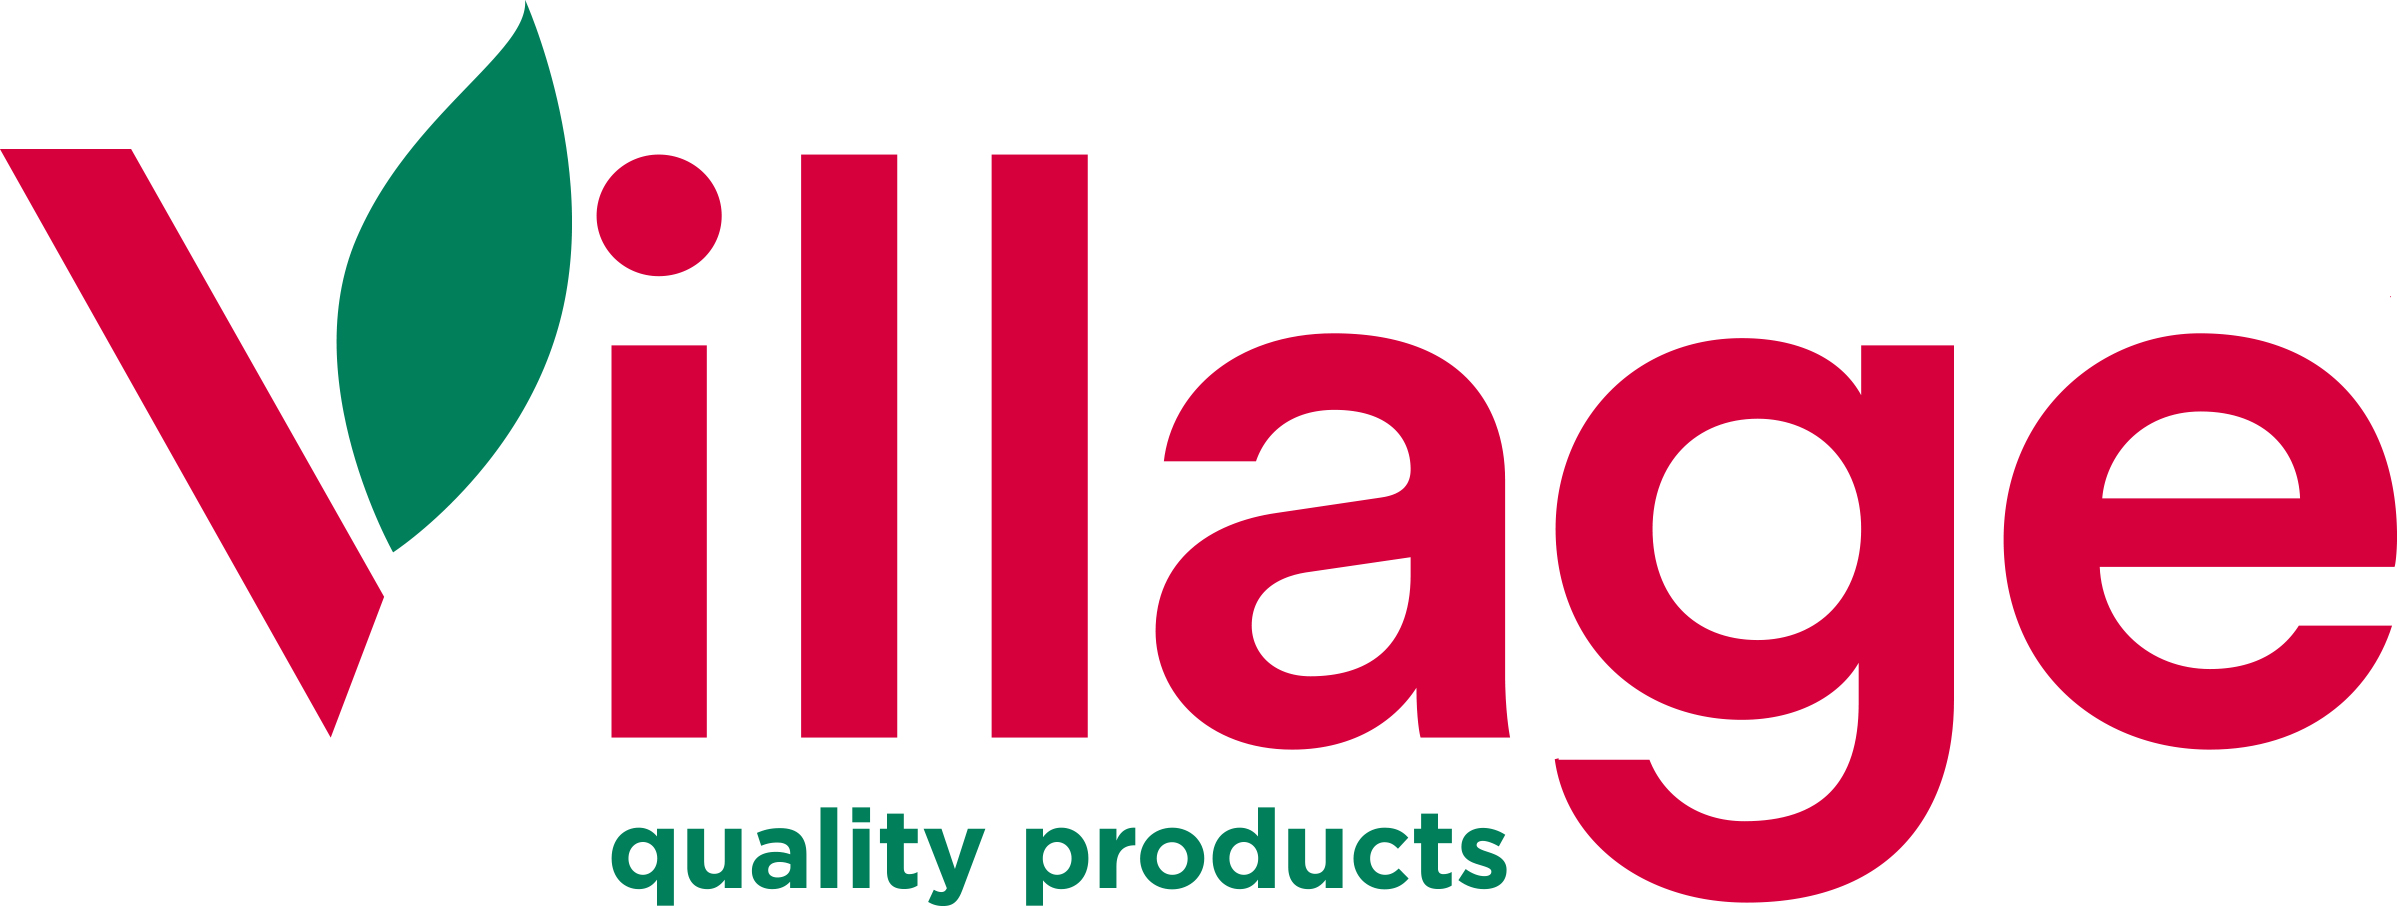 Village Quality Products